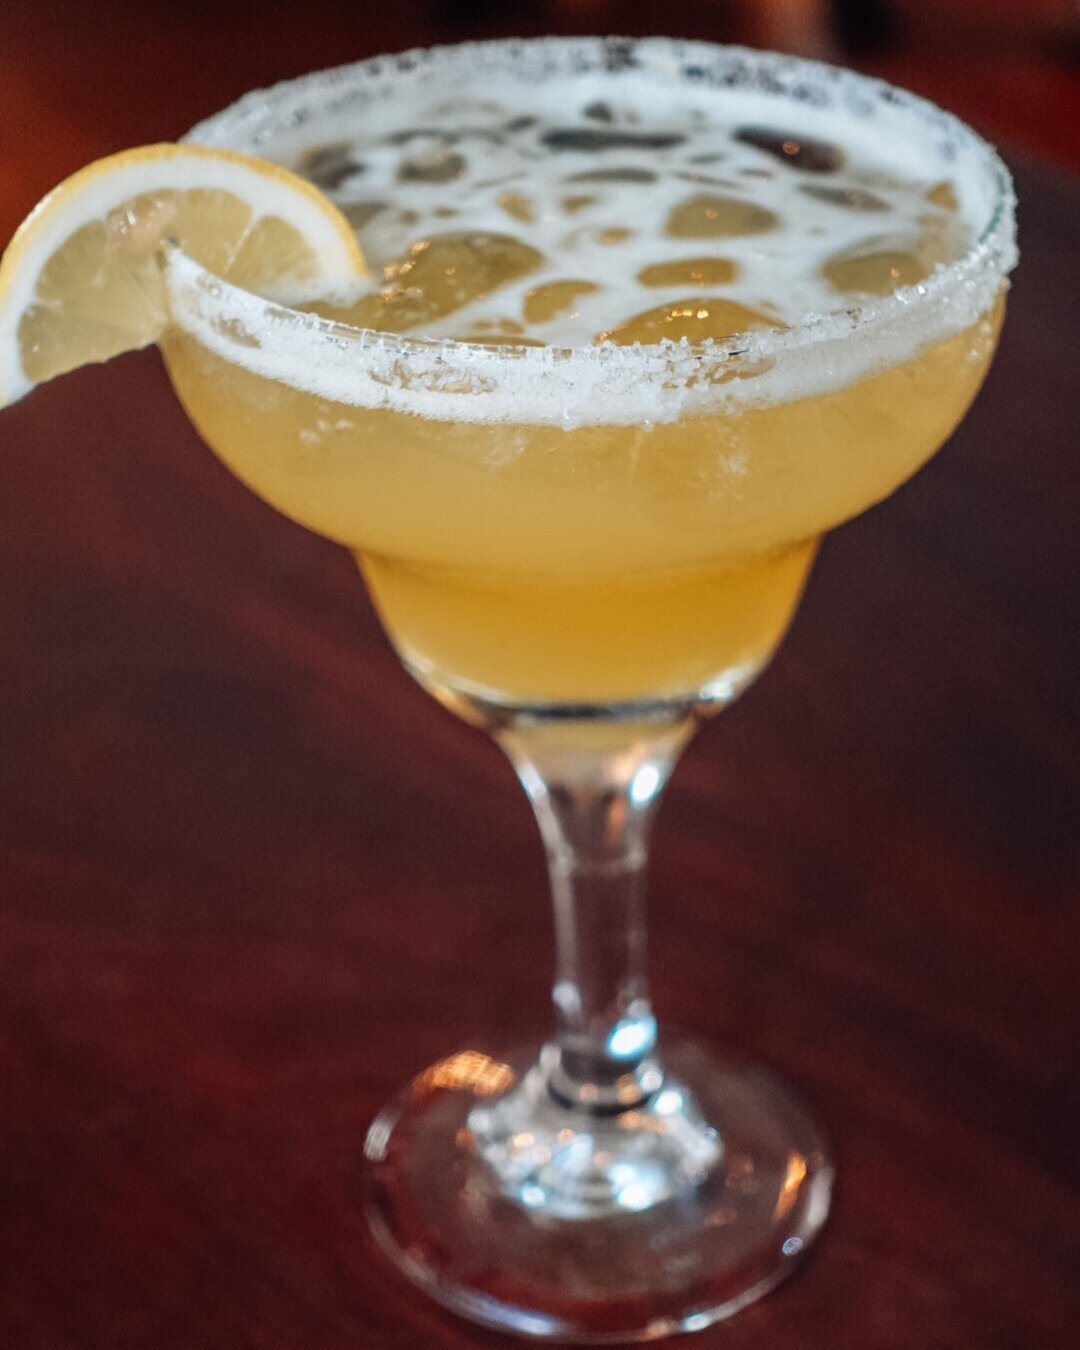 If you're looking for something delicious and refreshing, you must try our Turmeric Ginger Elixir! 🙌

Give us a call at (246) 432-1246, or use the link in our bio to reserve your table!

#meathouse #pub #barbados #restaurant #liveentertainment #band